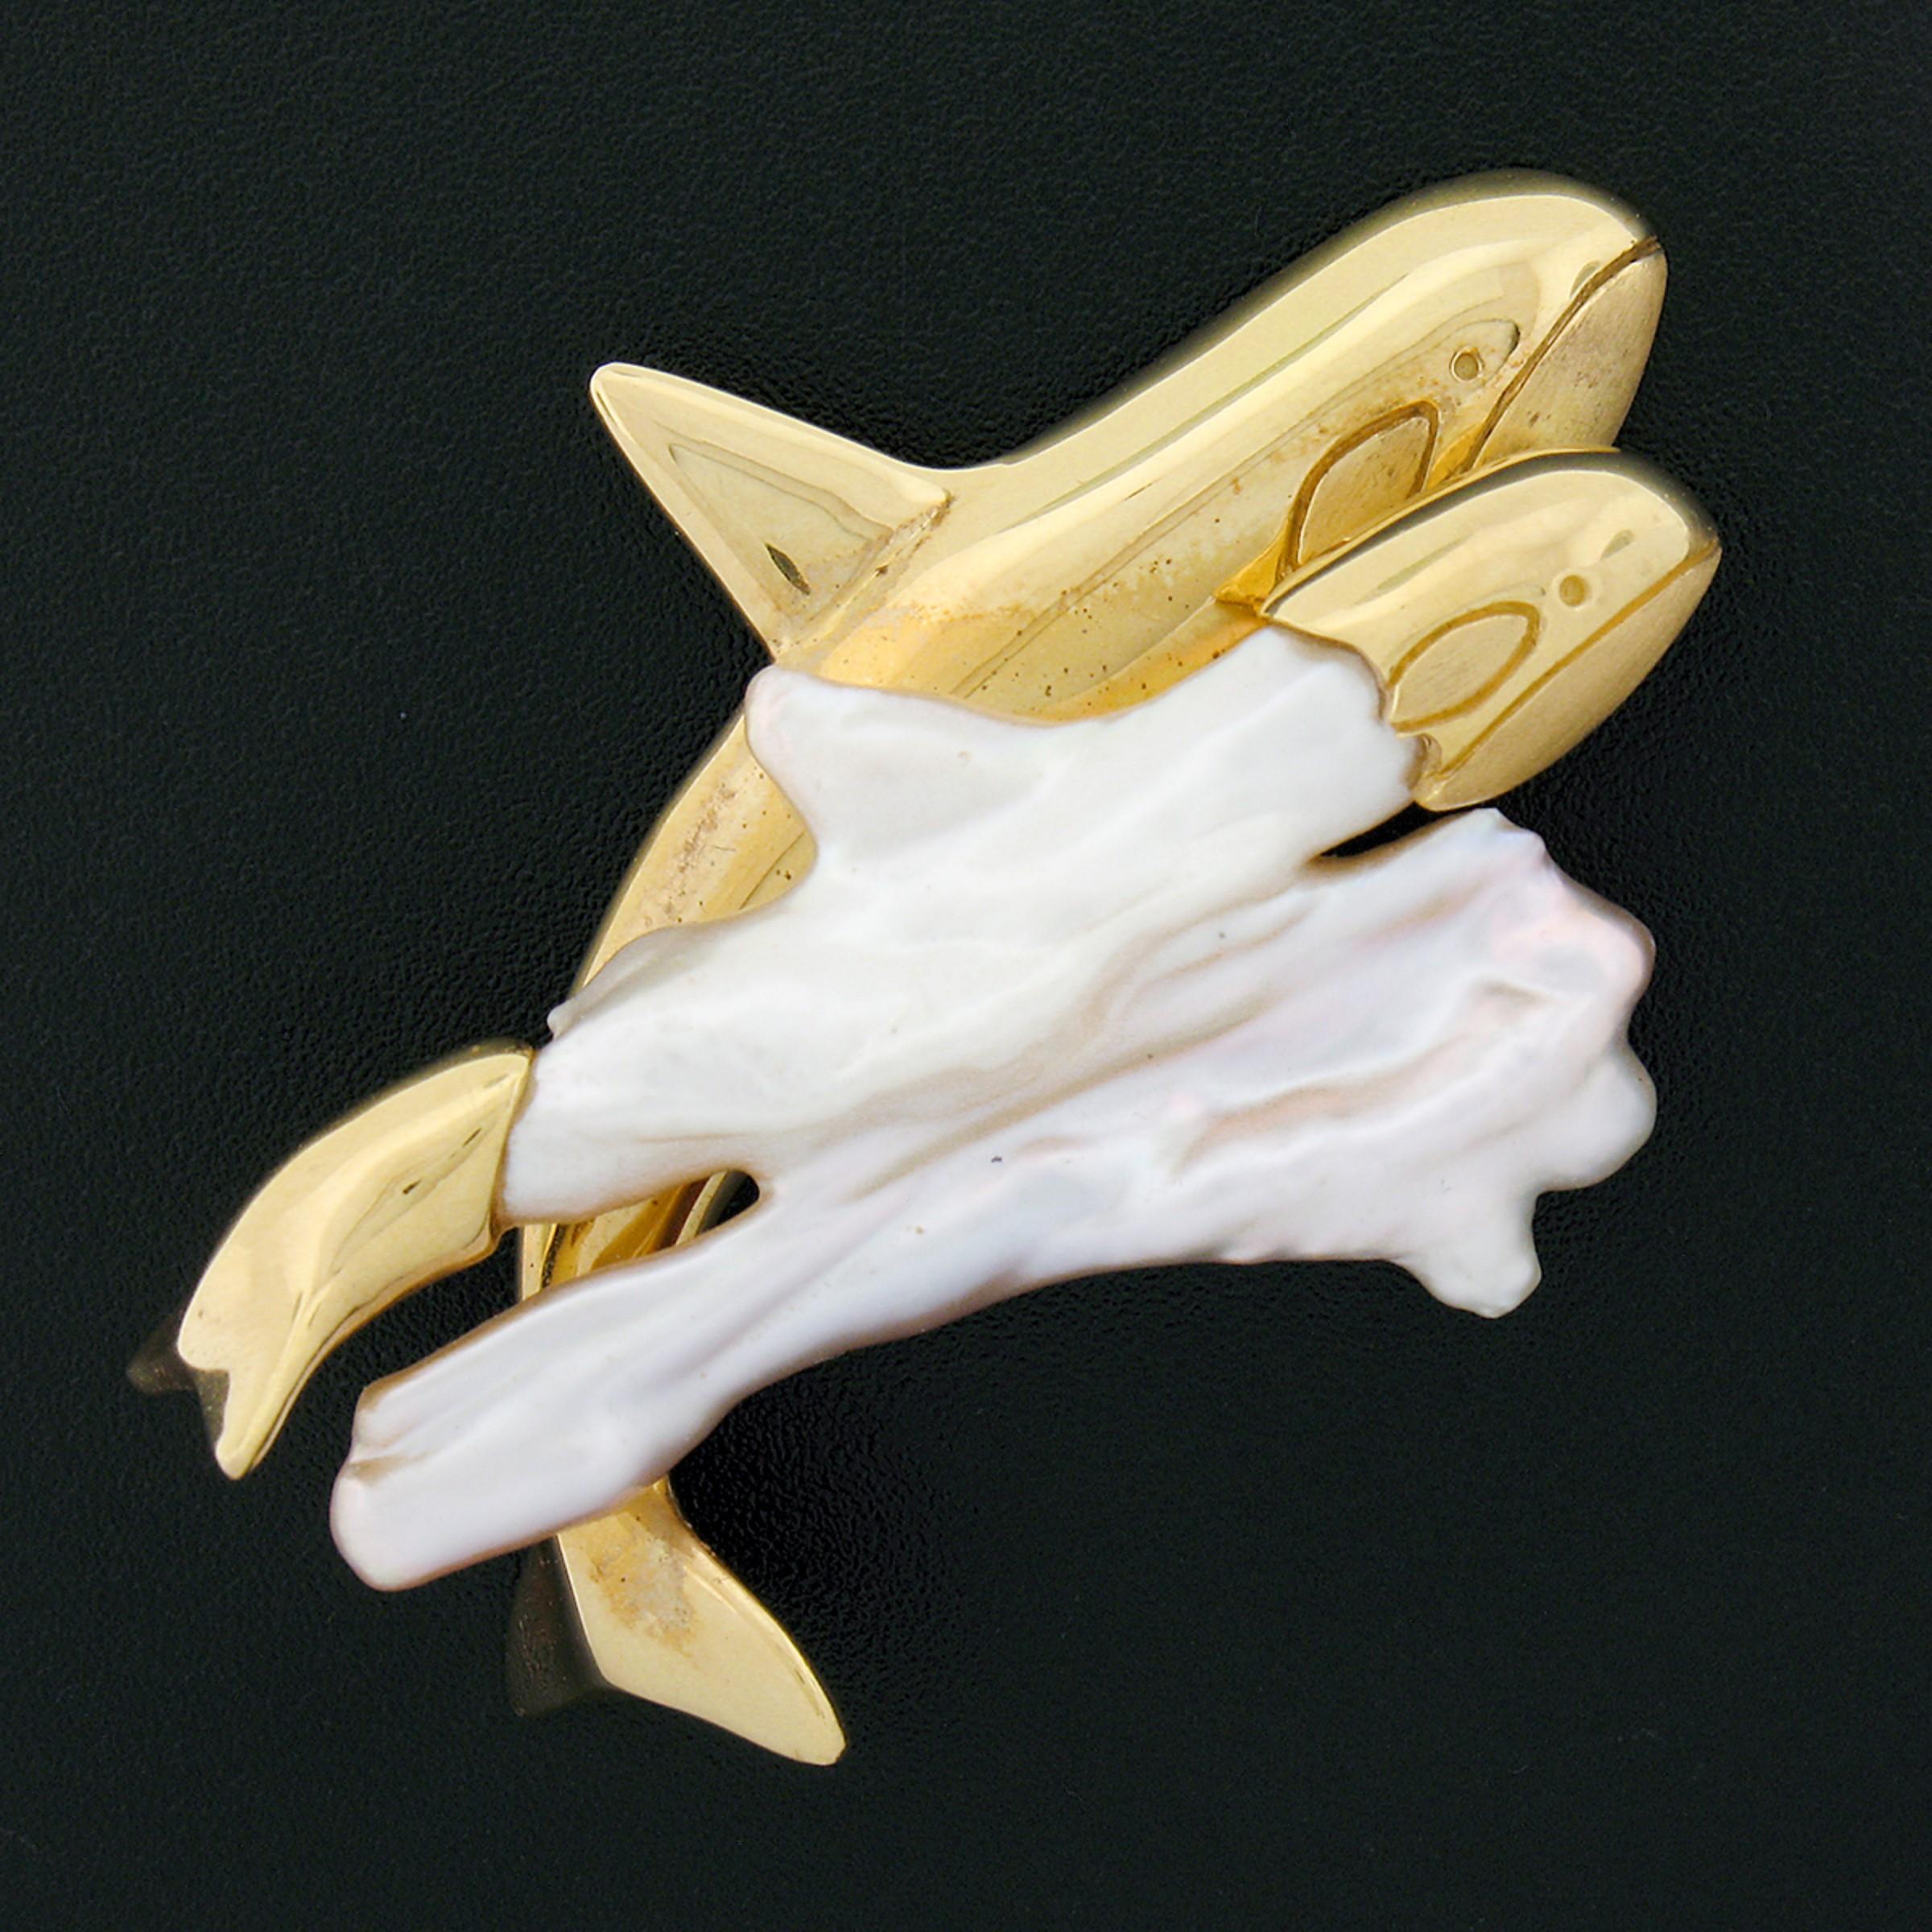 Here we have a custom made, vintage, brooch or pendant that was crafted from solid 18k yellow gold and a large, baroque, freshwater pearl in which has been turned into a beautiful orca whale design. The pearl's unique shape has been used perfectly